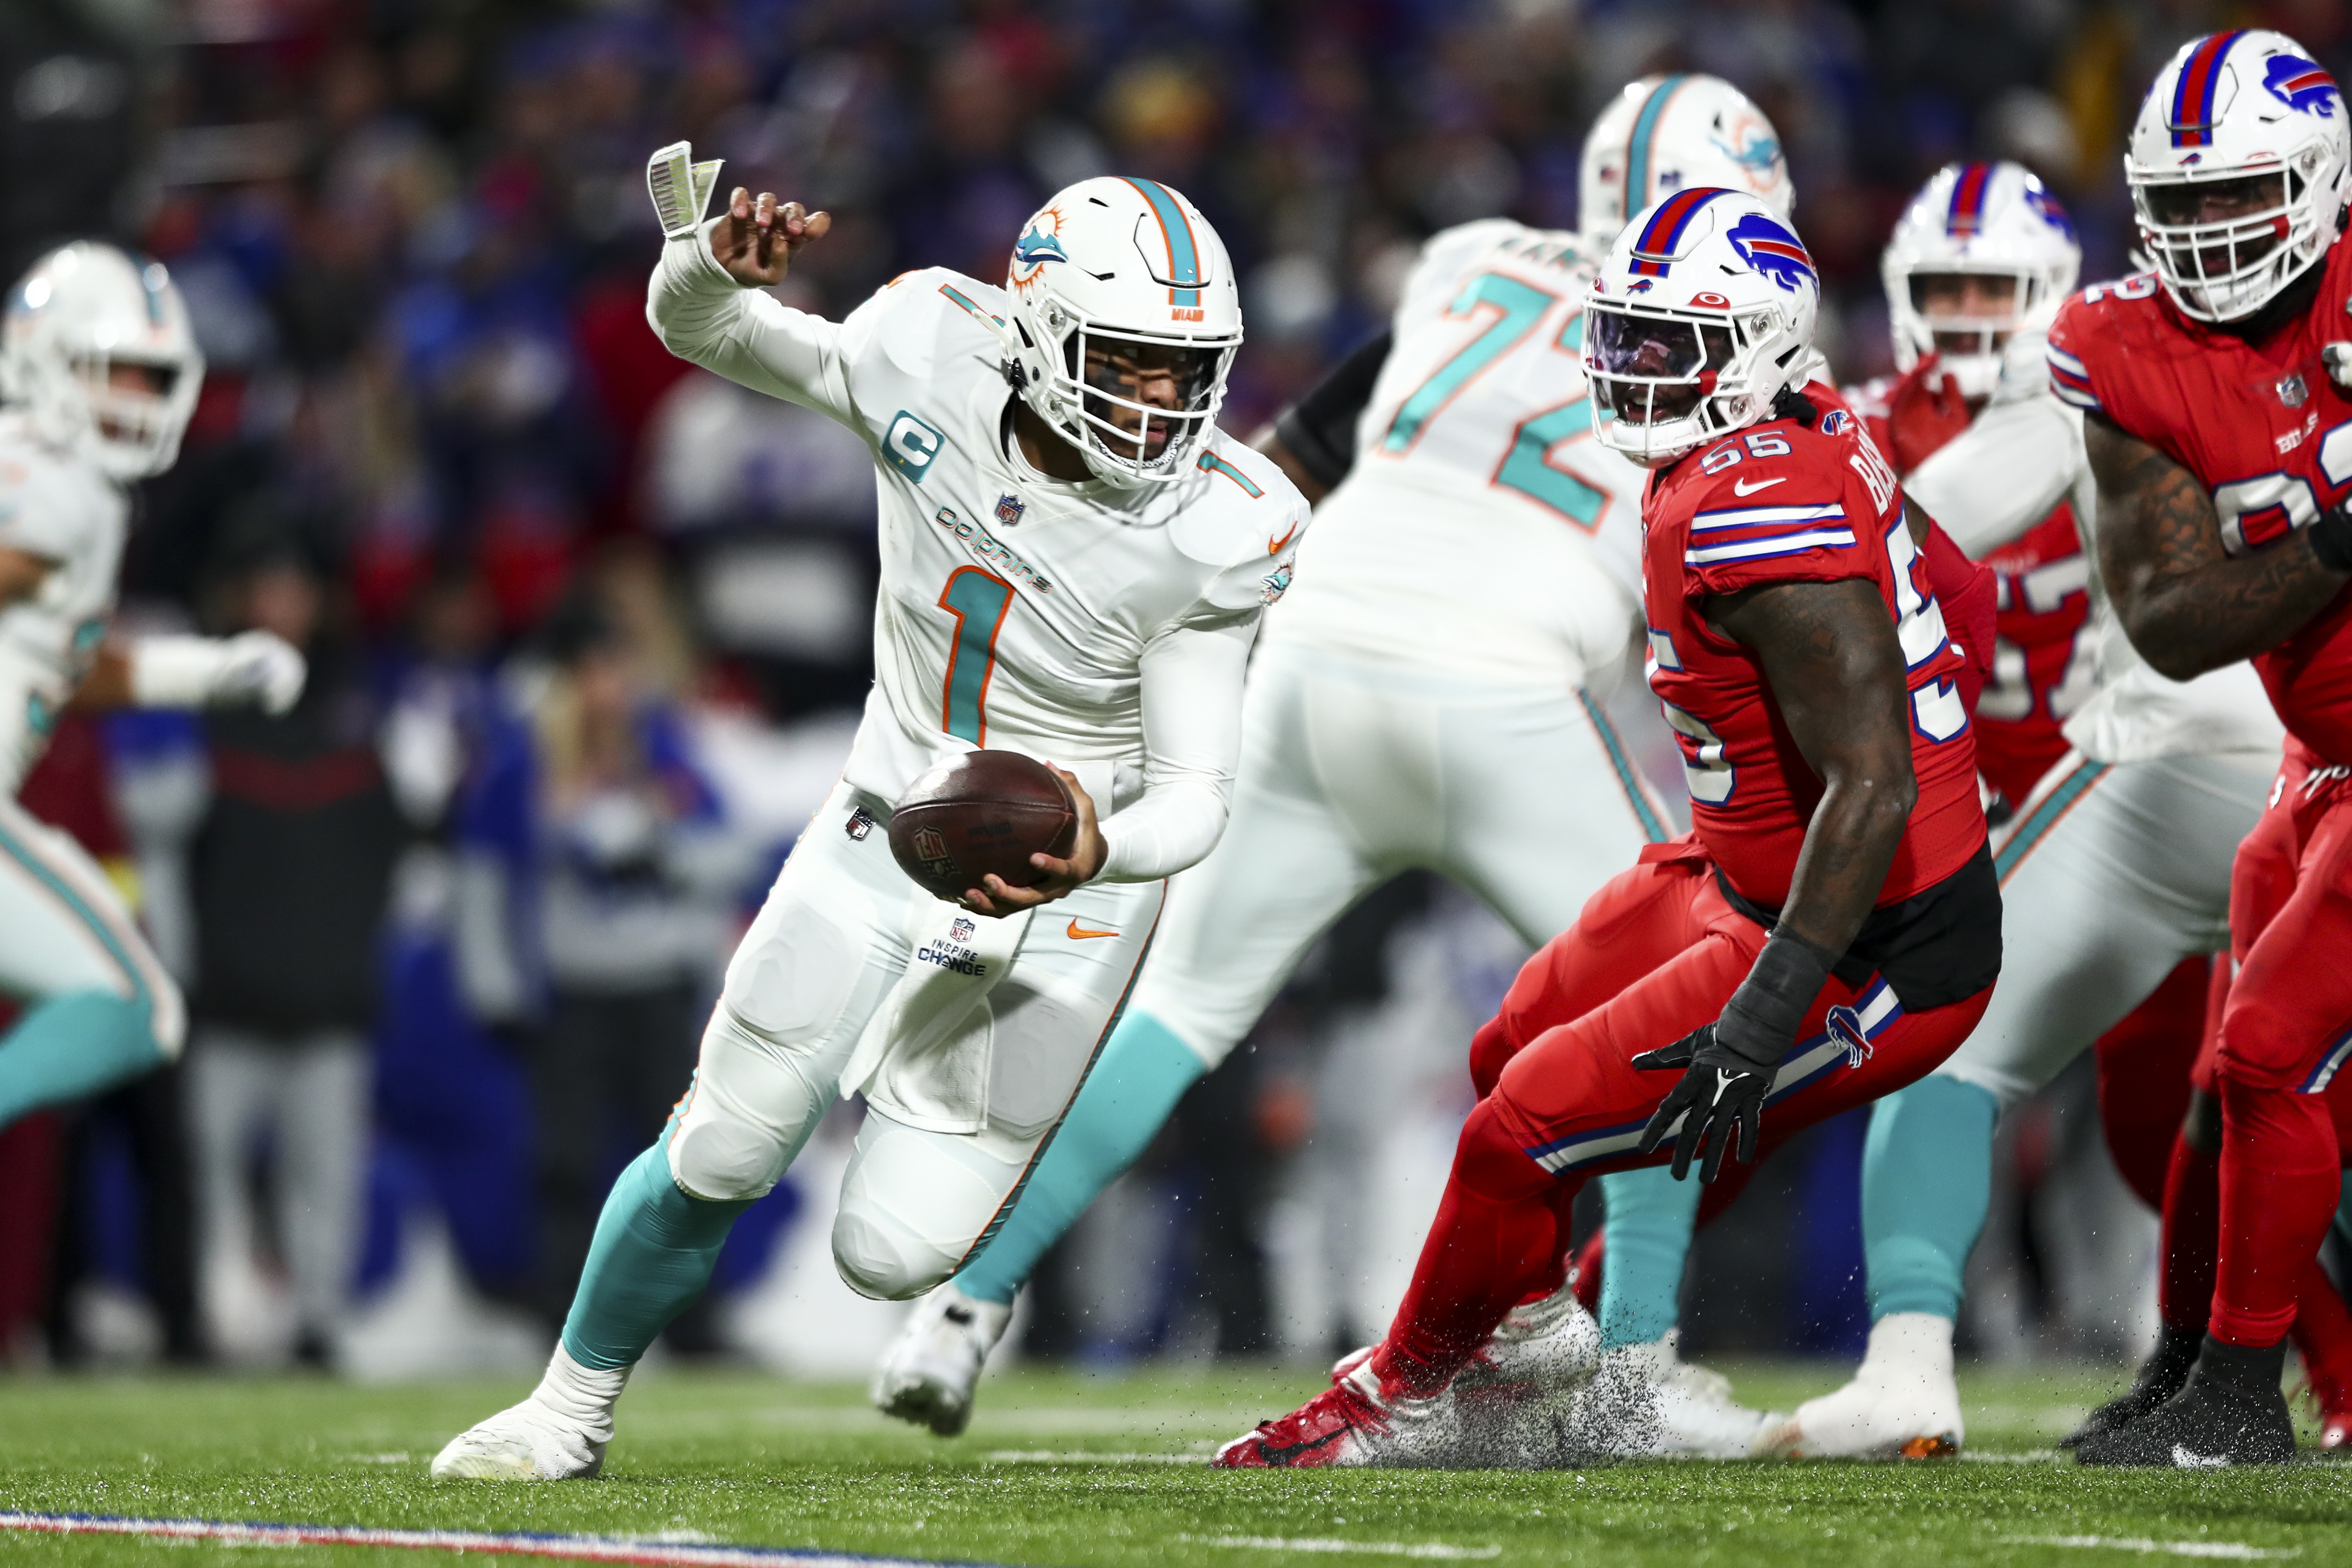 Quarterback Tua Tagovailoa (#1) of the Miami Dolphins scrambles out of the pocket in the game against the Buffalo Bills at Highmark Stadium in Orchard Park, New York, December 17, 2022. /CFP